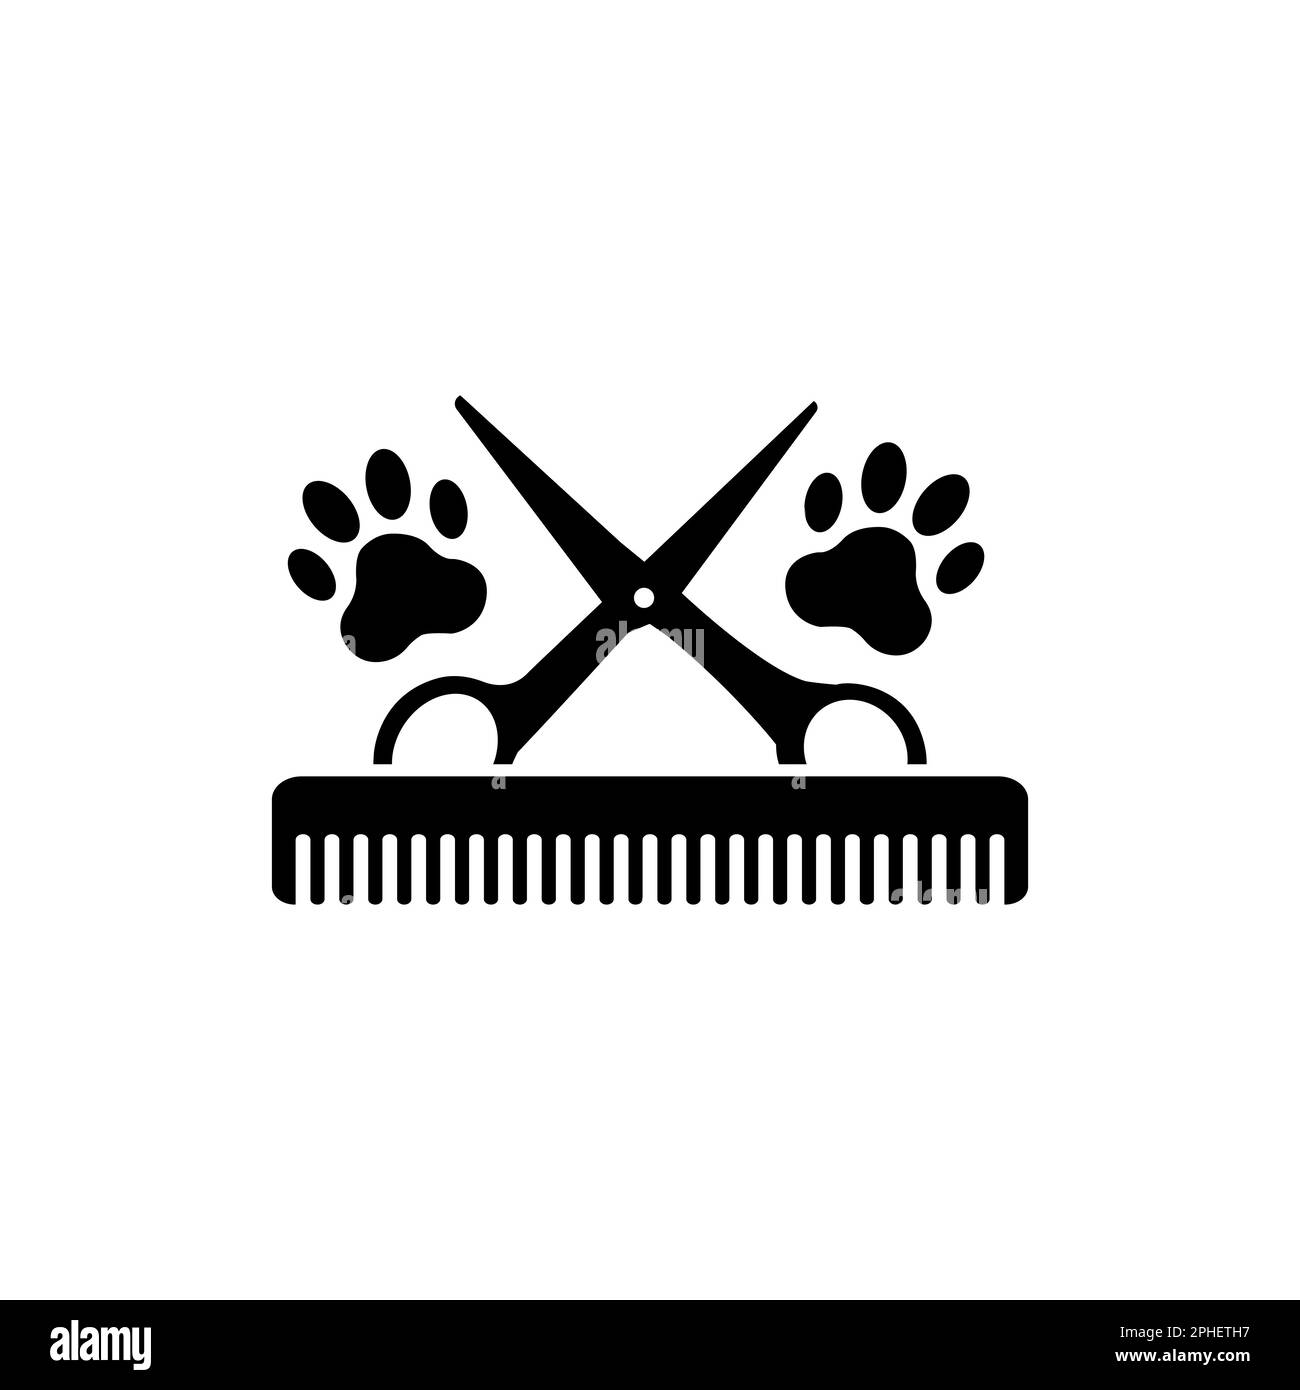 Illustration animal grooming. Hairdresser for dogs and cats symbol. Stock Vector